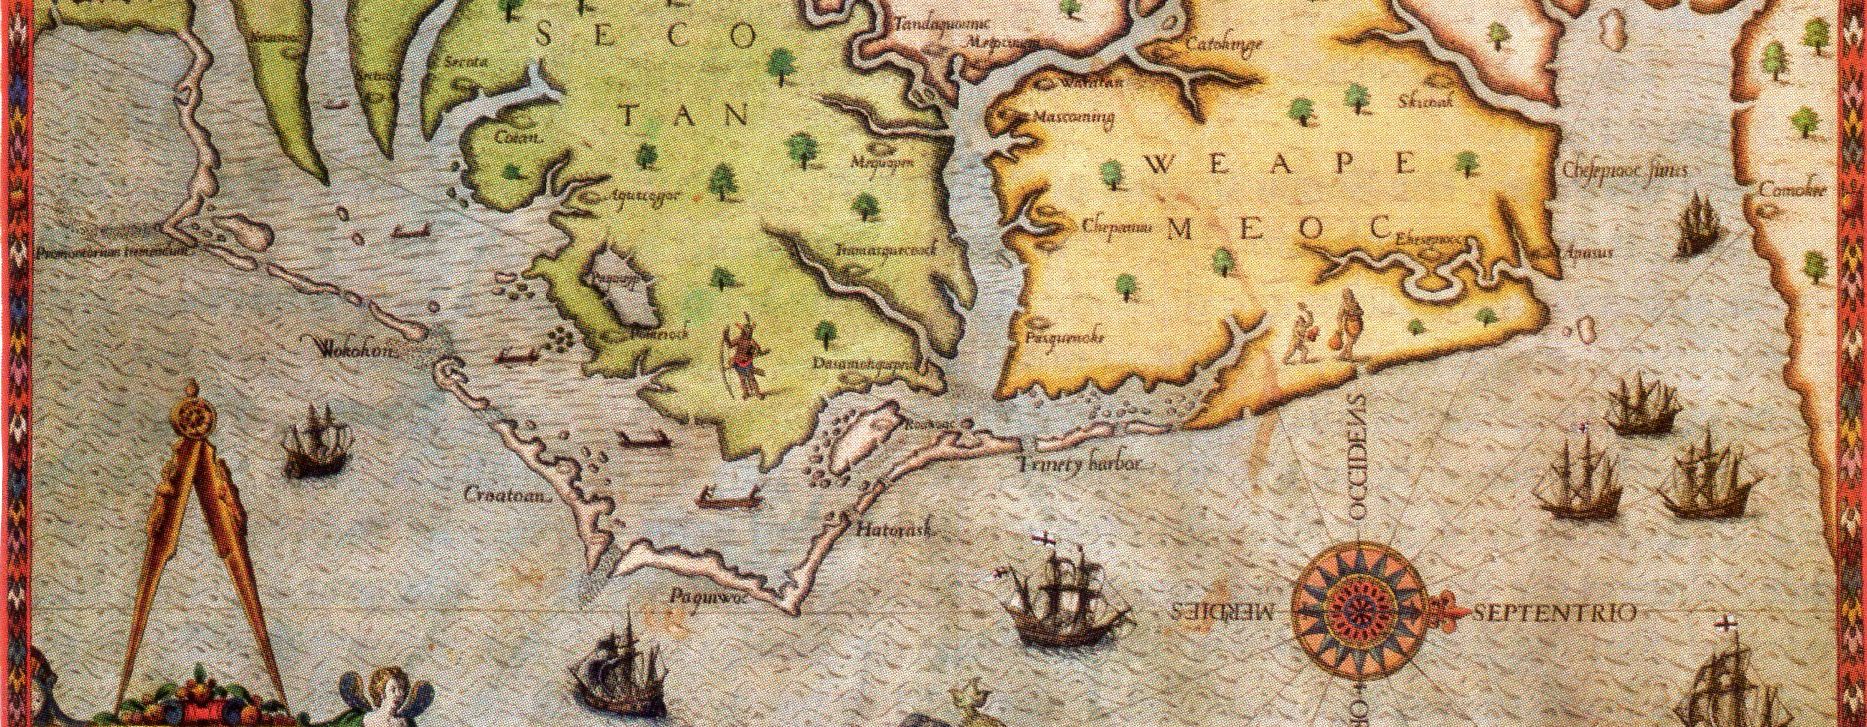 Theodor de Bry's 1591 map of Virginia clearly shows Croatoan and Hatorask islands.